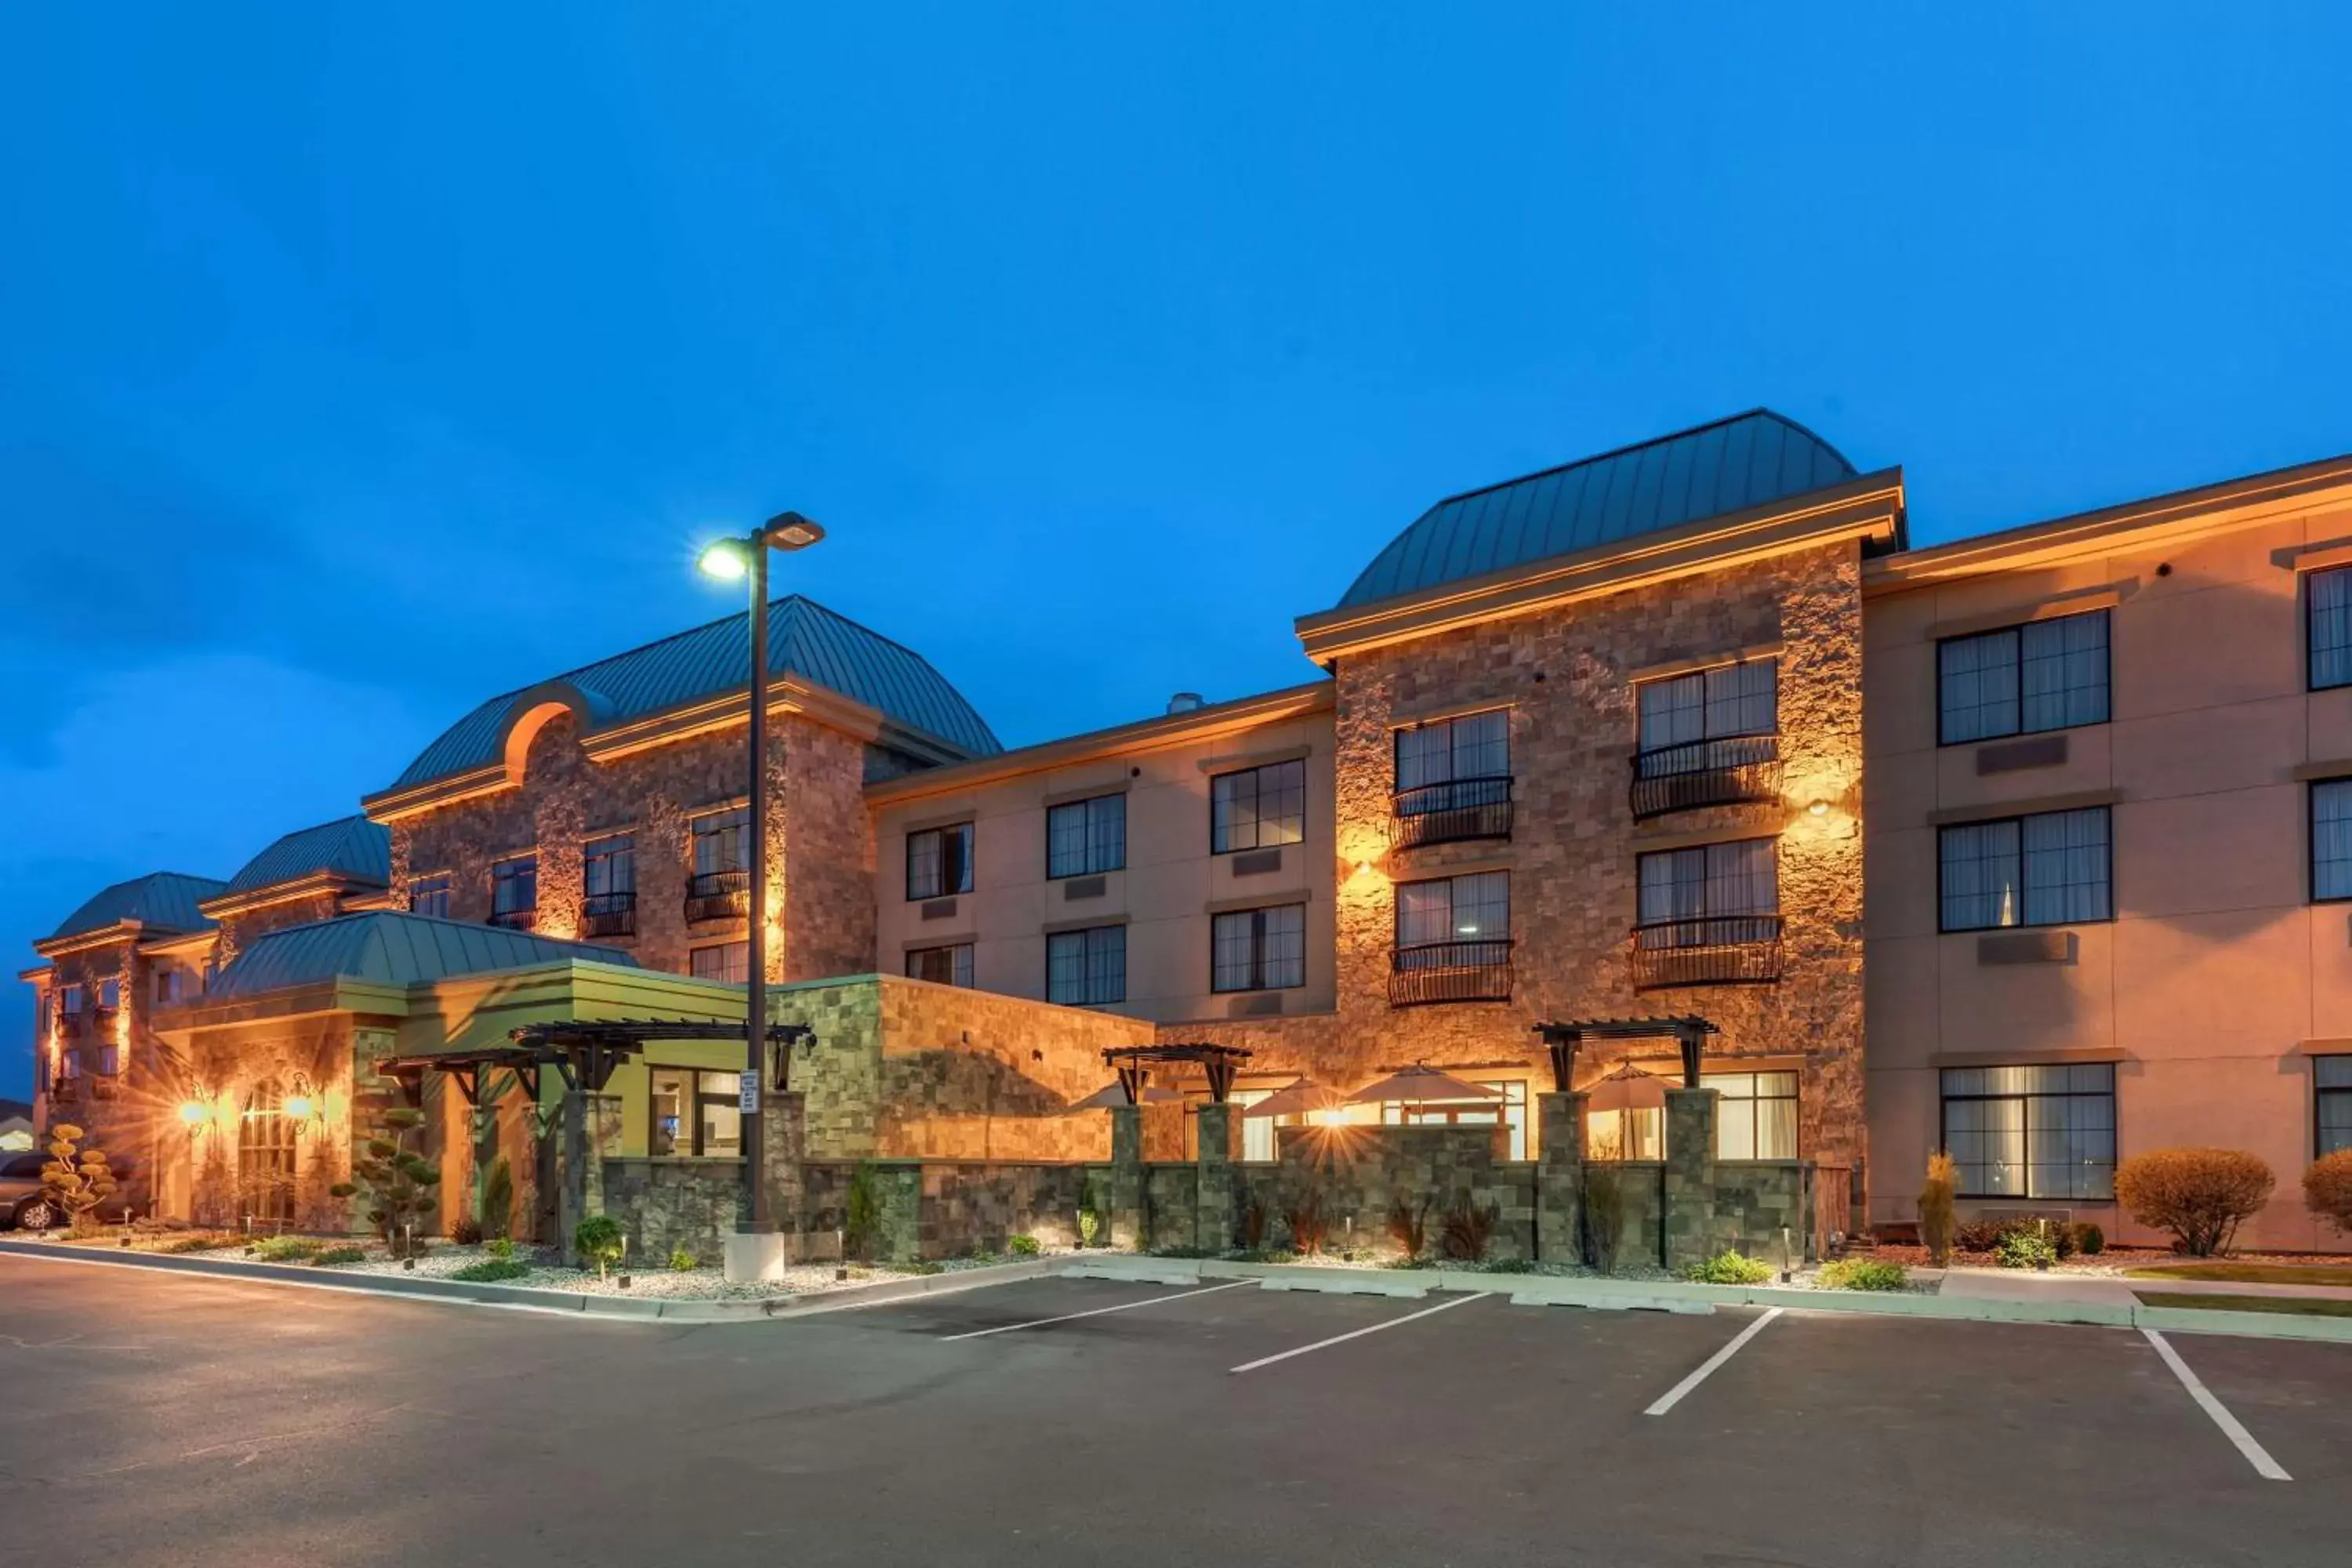 Property Building in Best Western Premier Pasco Inn and Suites